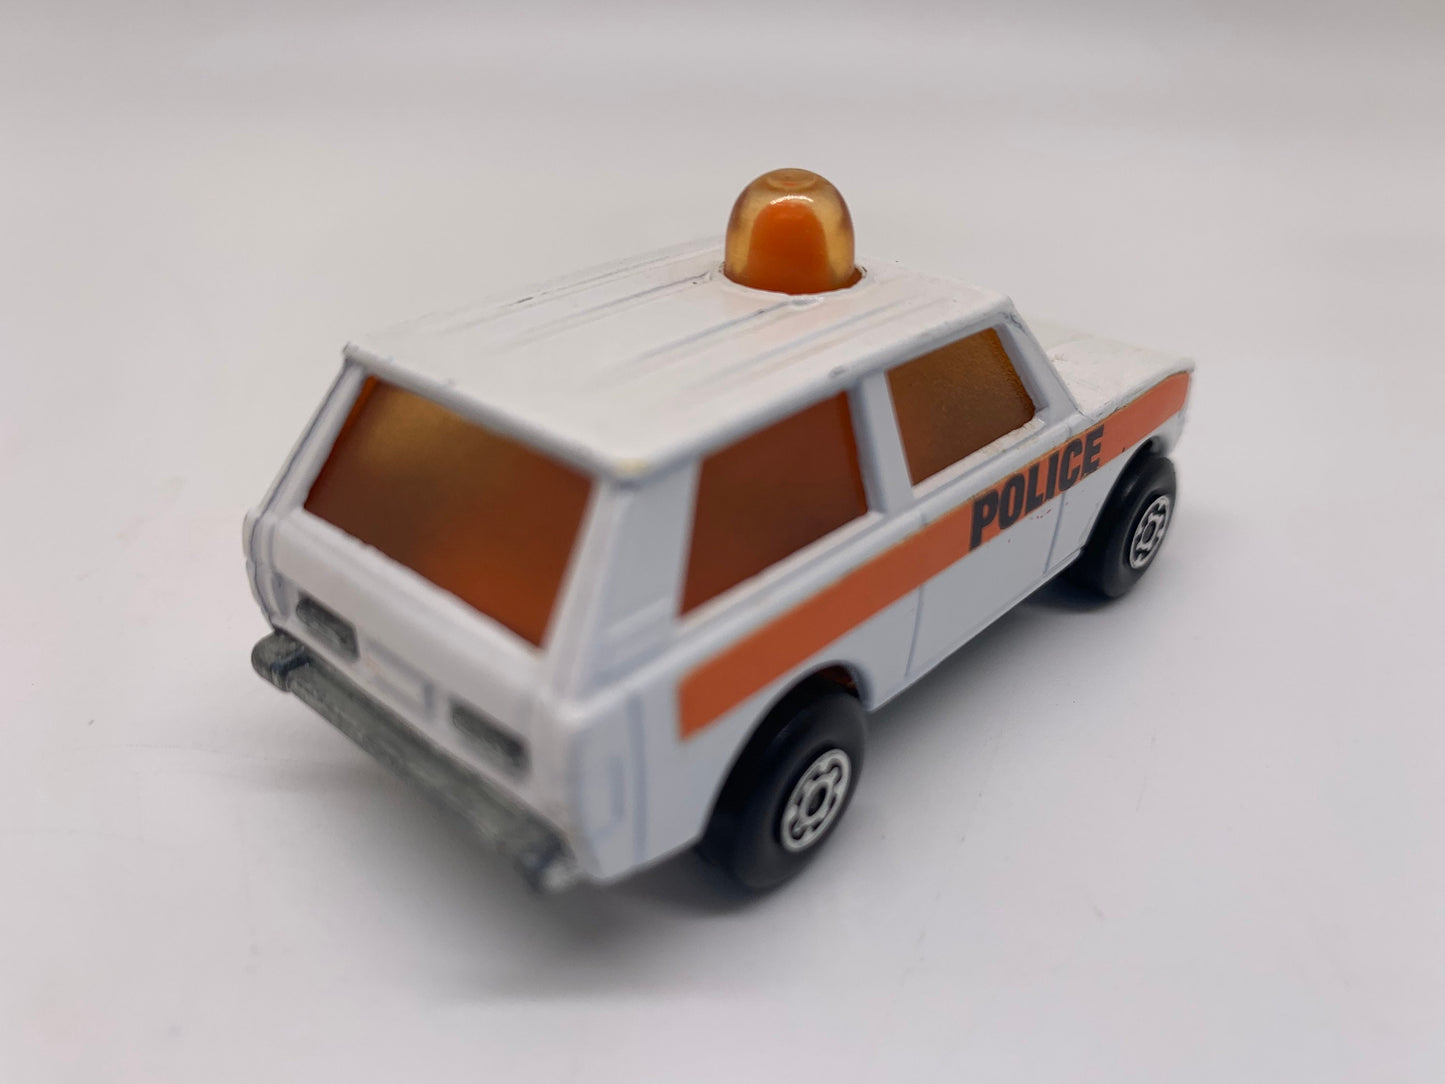 Matchbox Range Rover Police Patrol White Rolamatics Collectable Miniature Scale Model Toy Car Perfect Birthday Gift